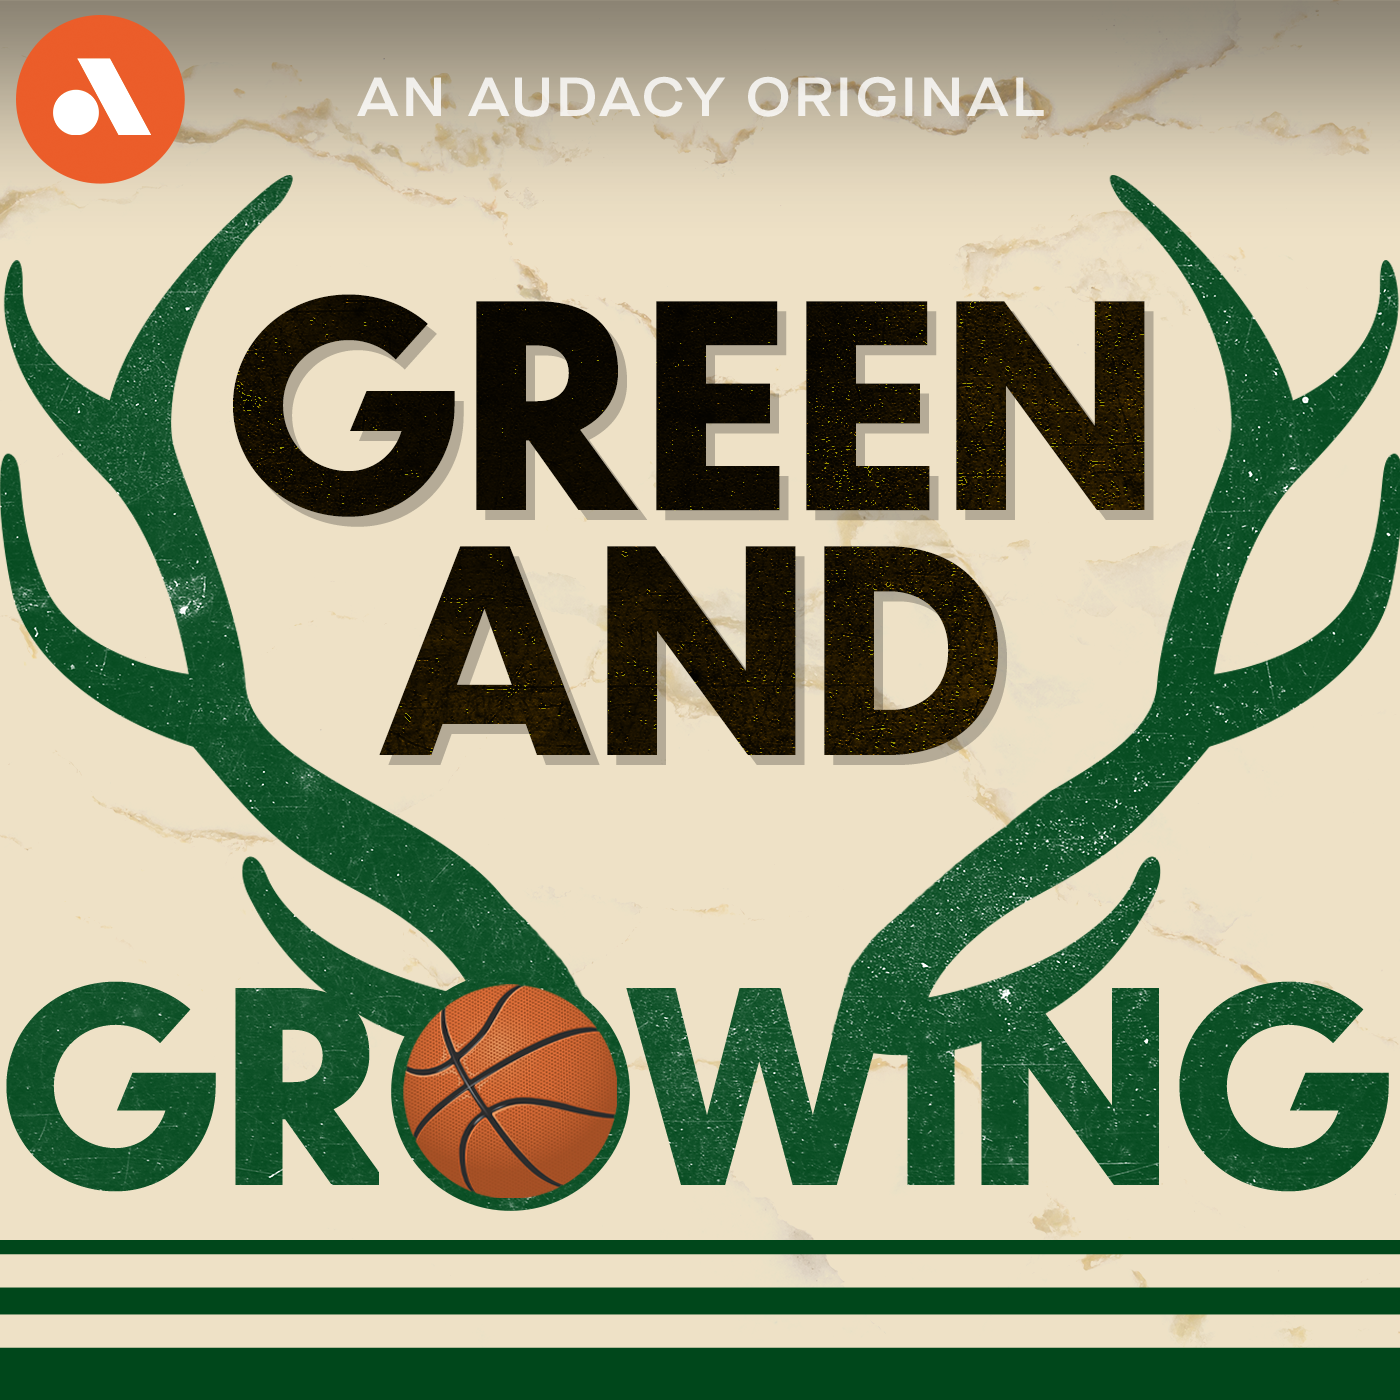 Will Bucks Head Coach Adrian Griffin Treat Players Like Previous Head Coaches He Worked For? | Green And Growing